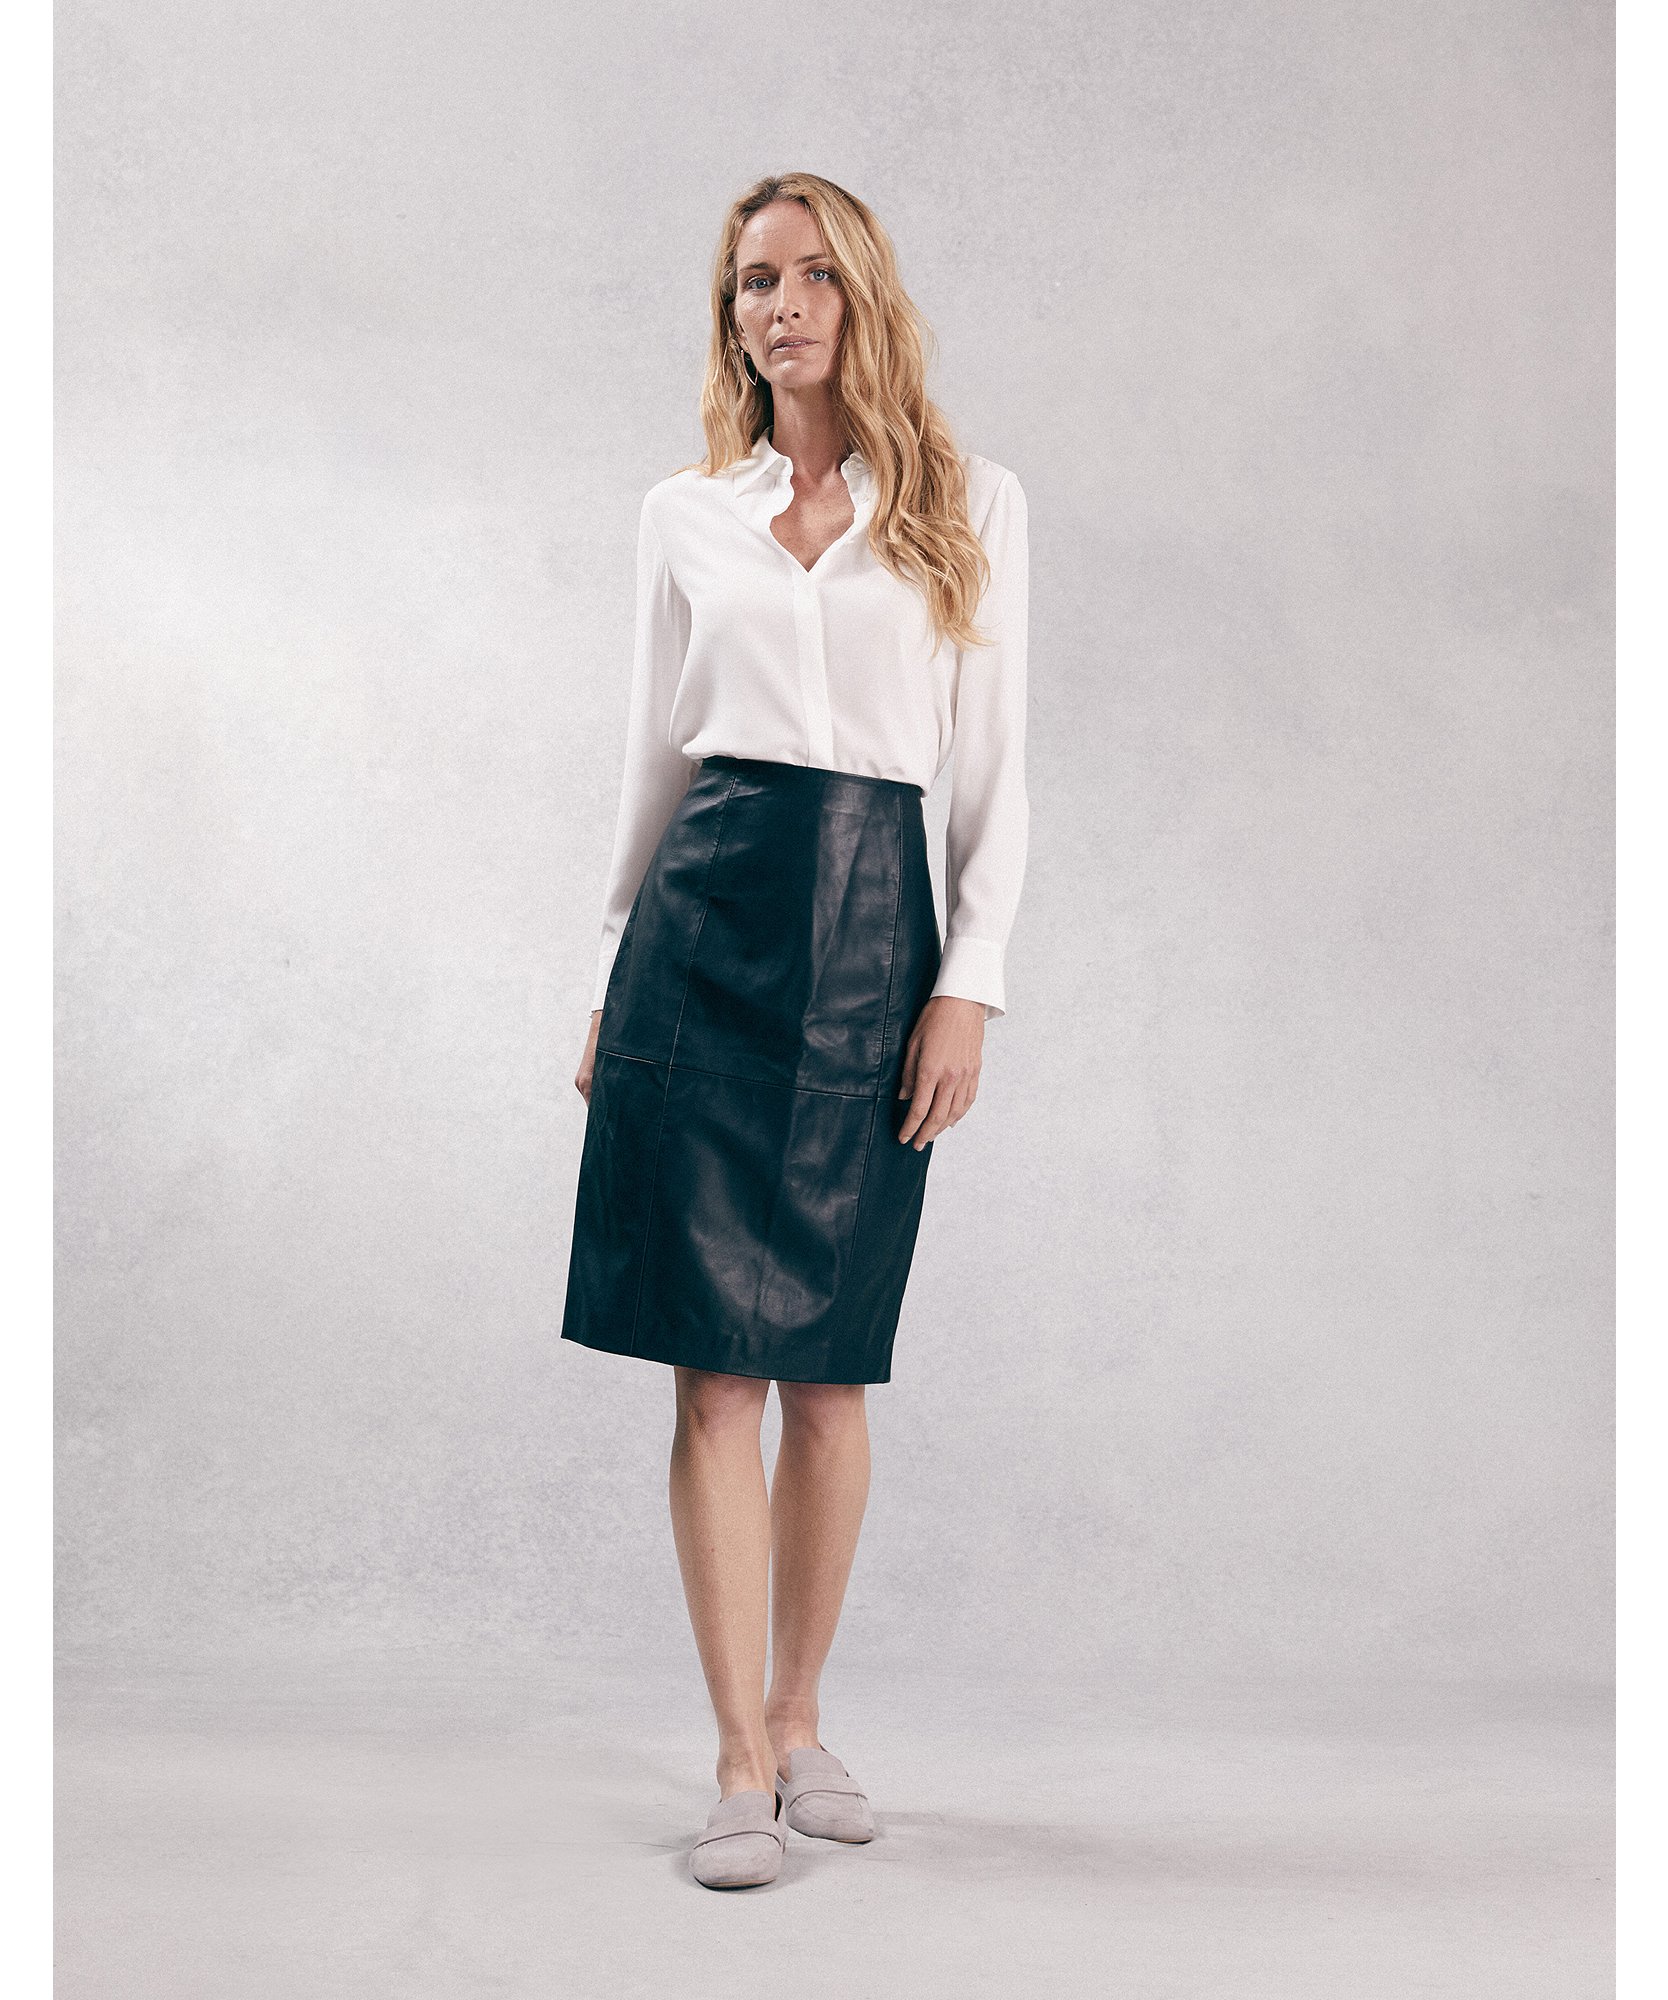 Leather Pencil Skirt | All Clothing Sale | The White Company US